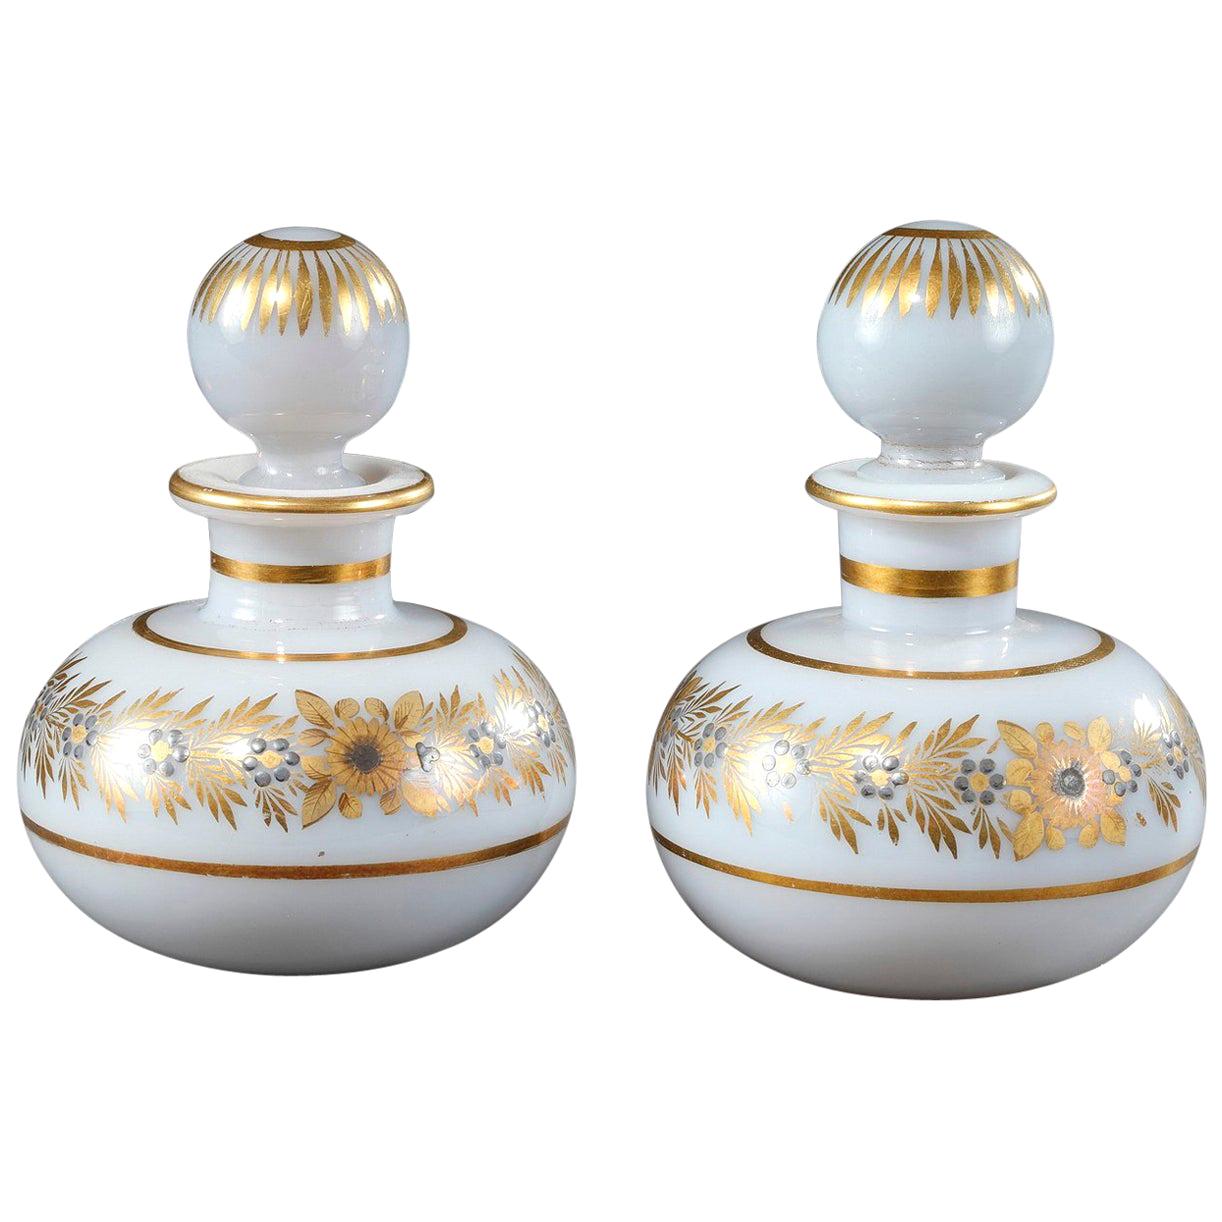 19th Century Pair of Opaline Crystal Perfume Bottle by Jean-Baptiste Desvignes